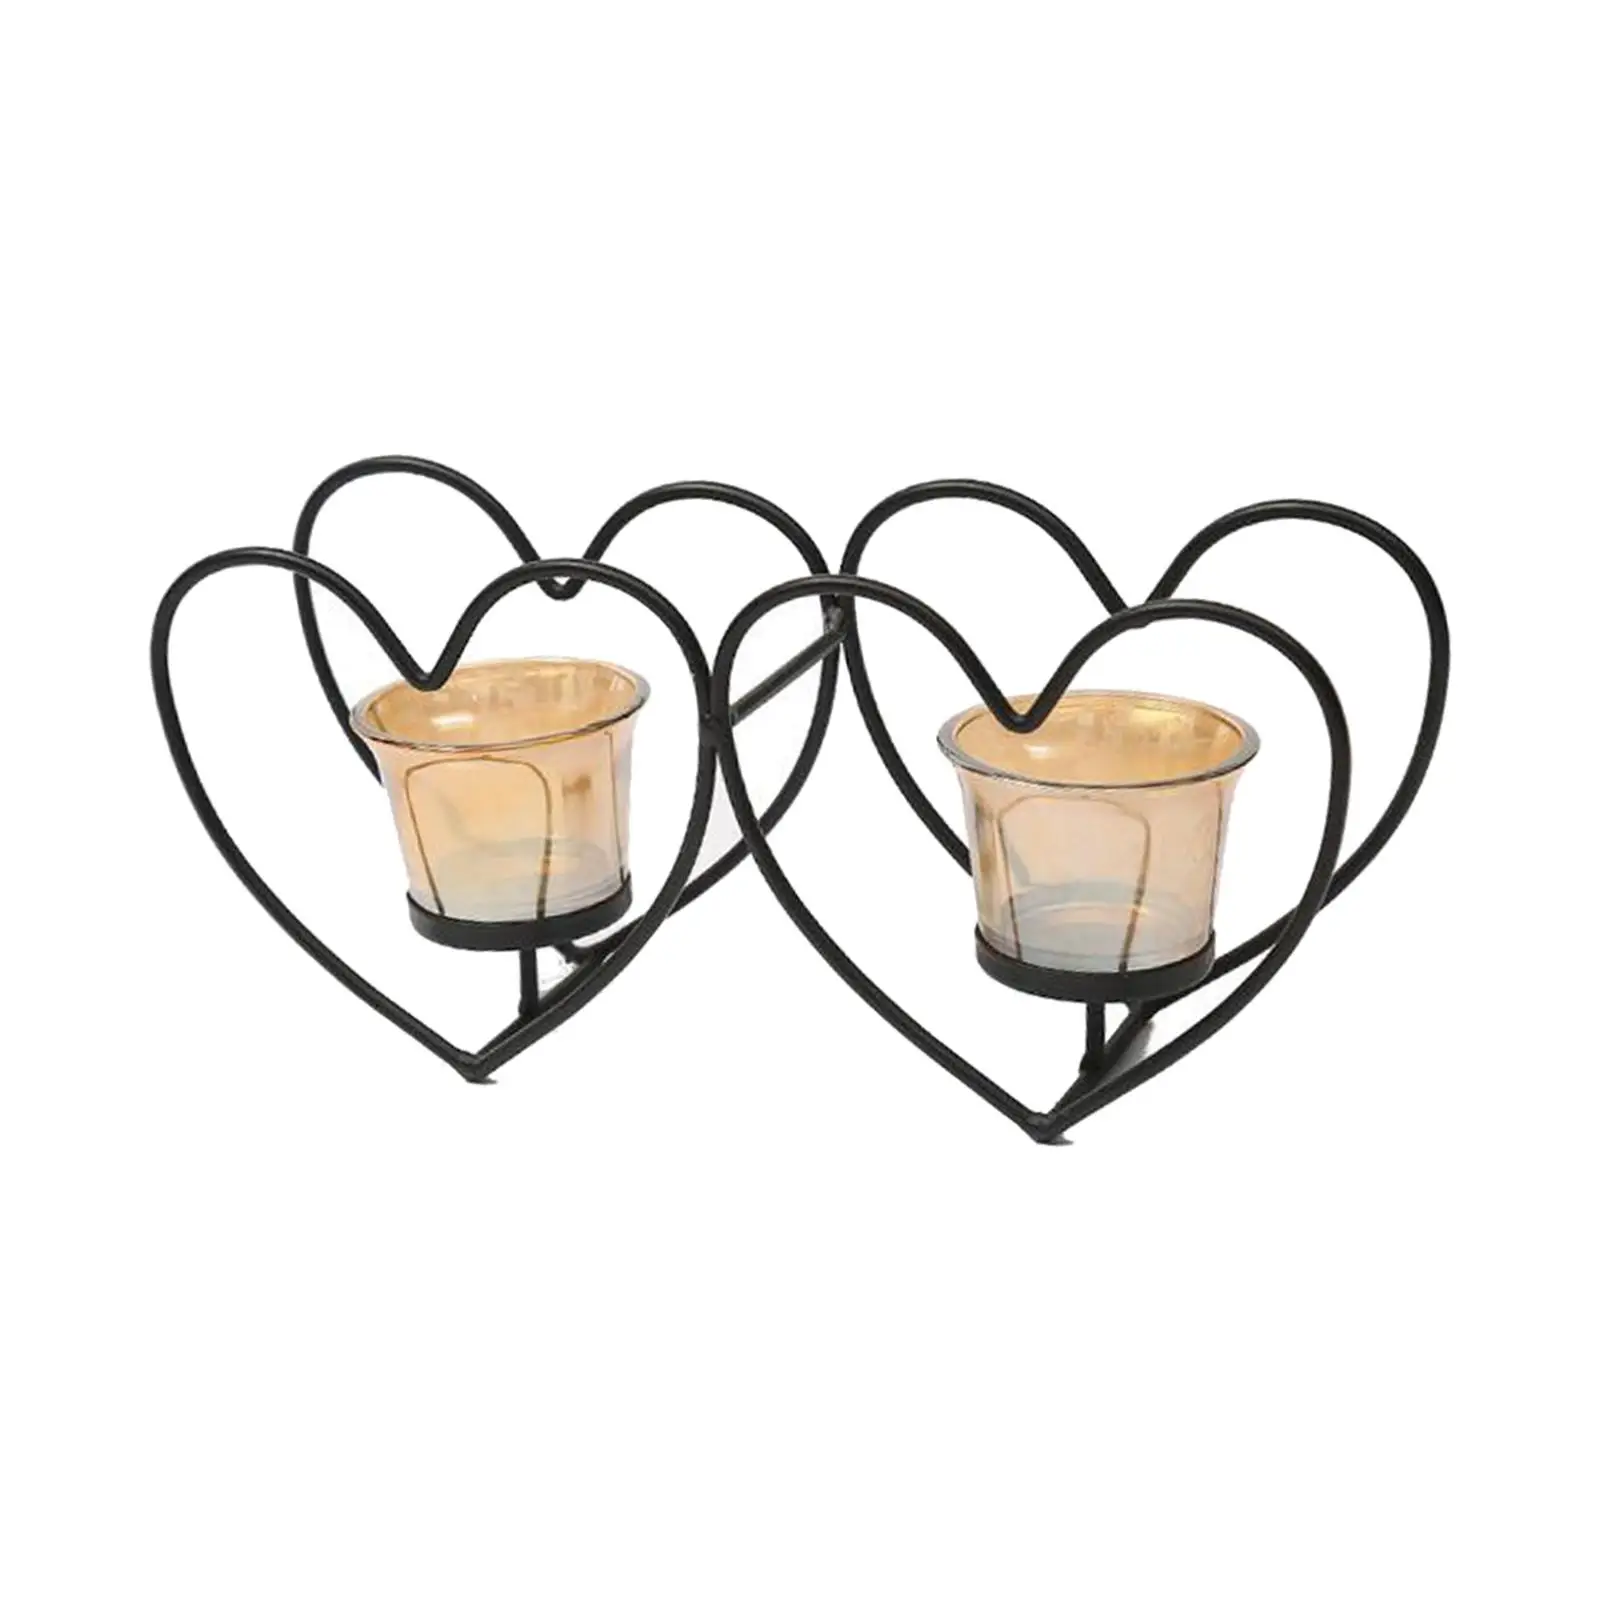 Modern Heart Candle Holder Candlestick Decorative Candle Stand Wedding Party Gift Decoration